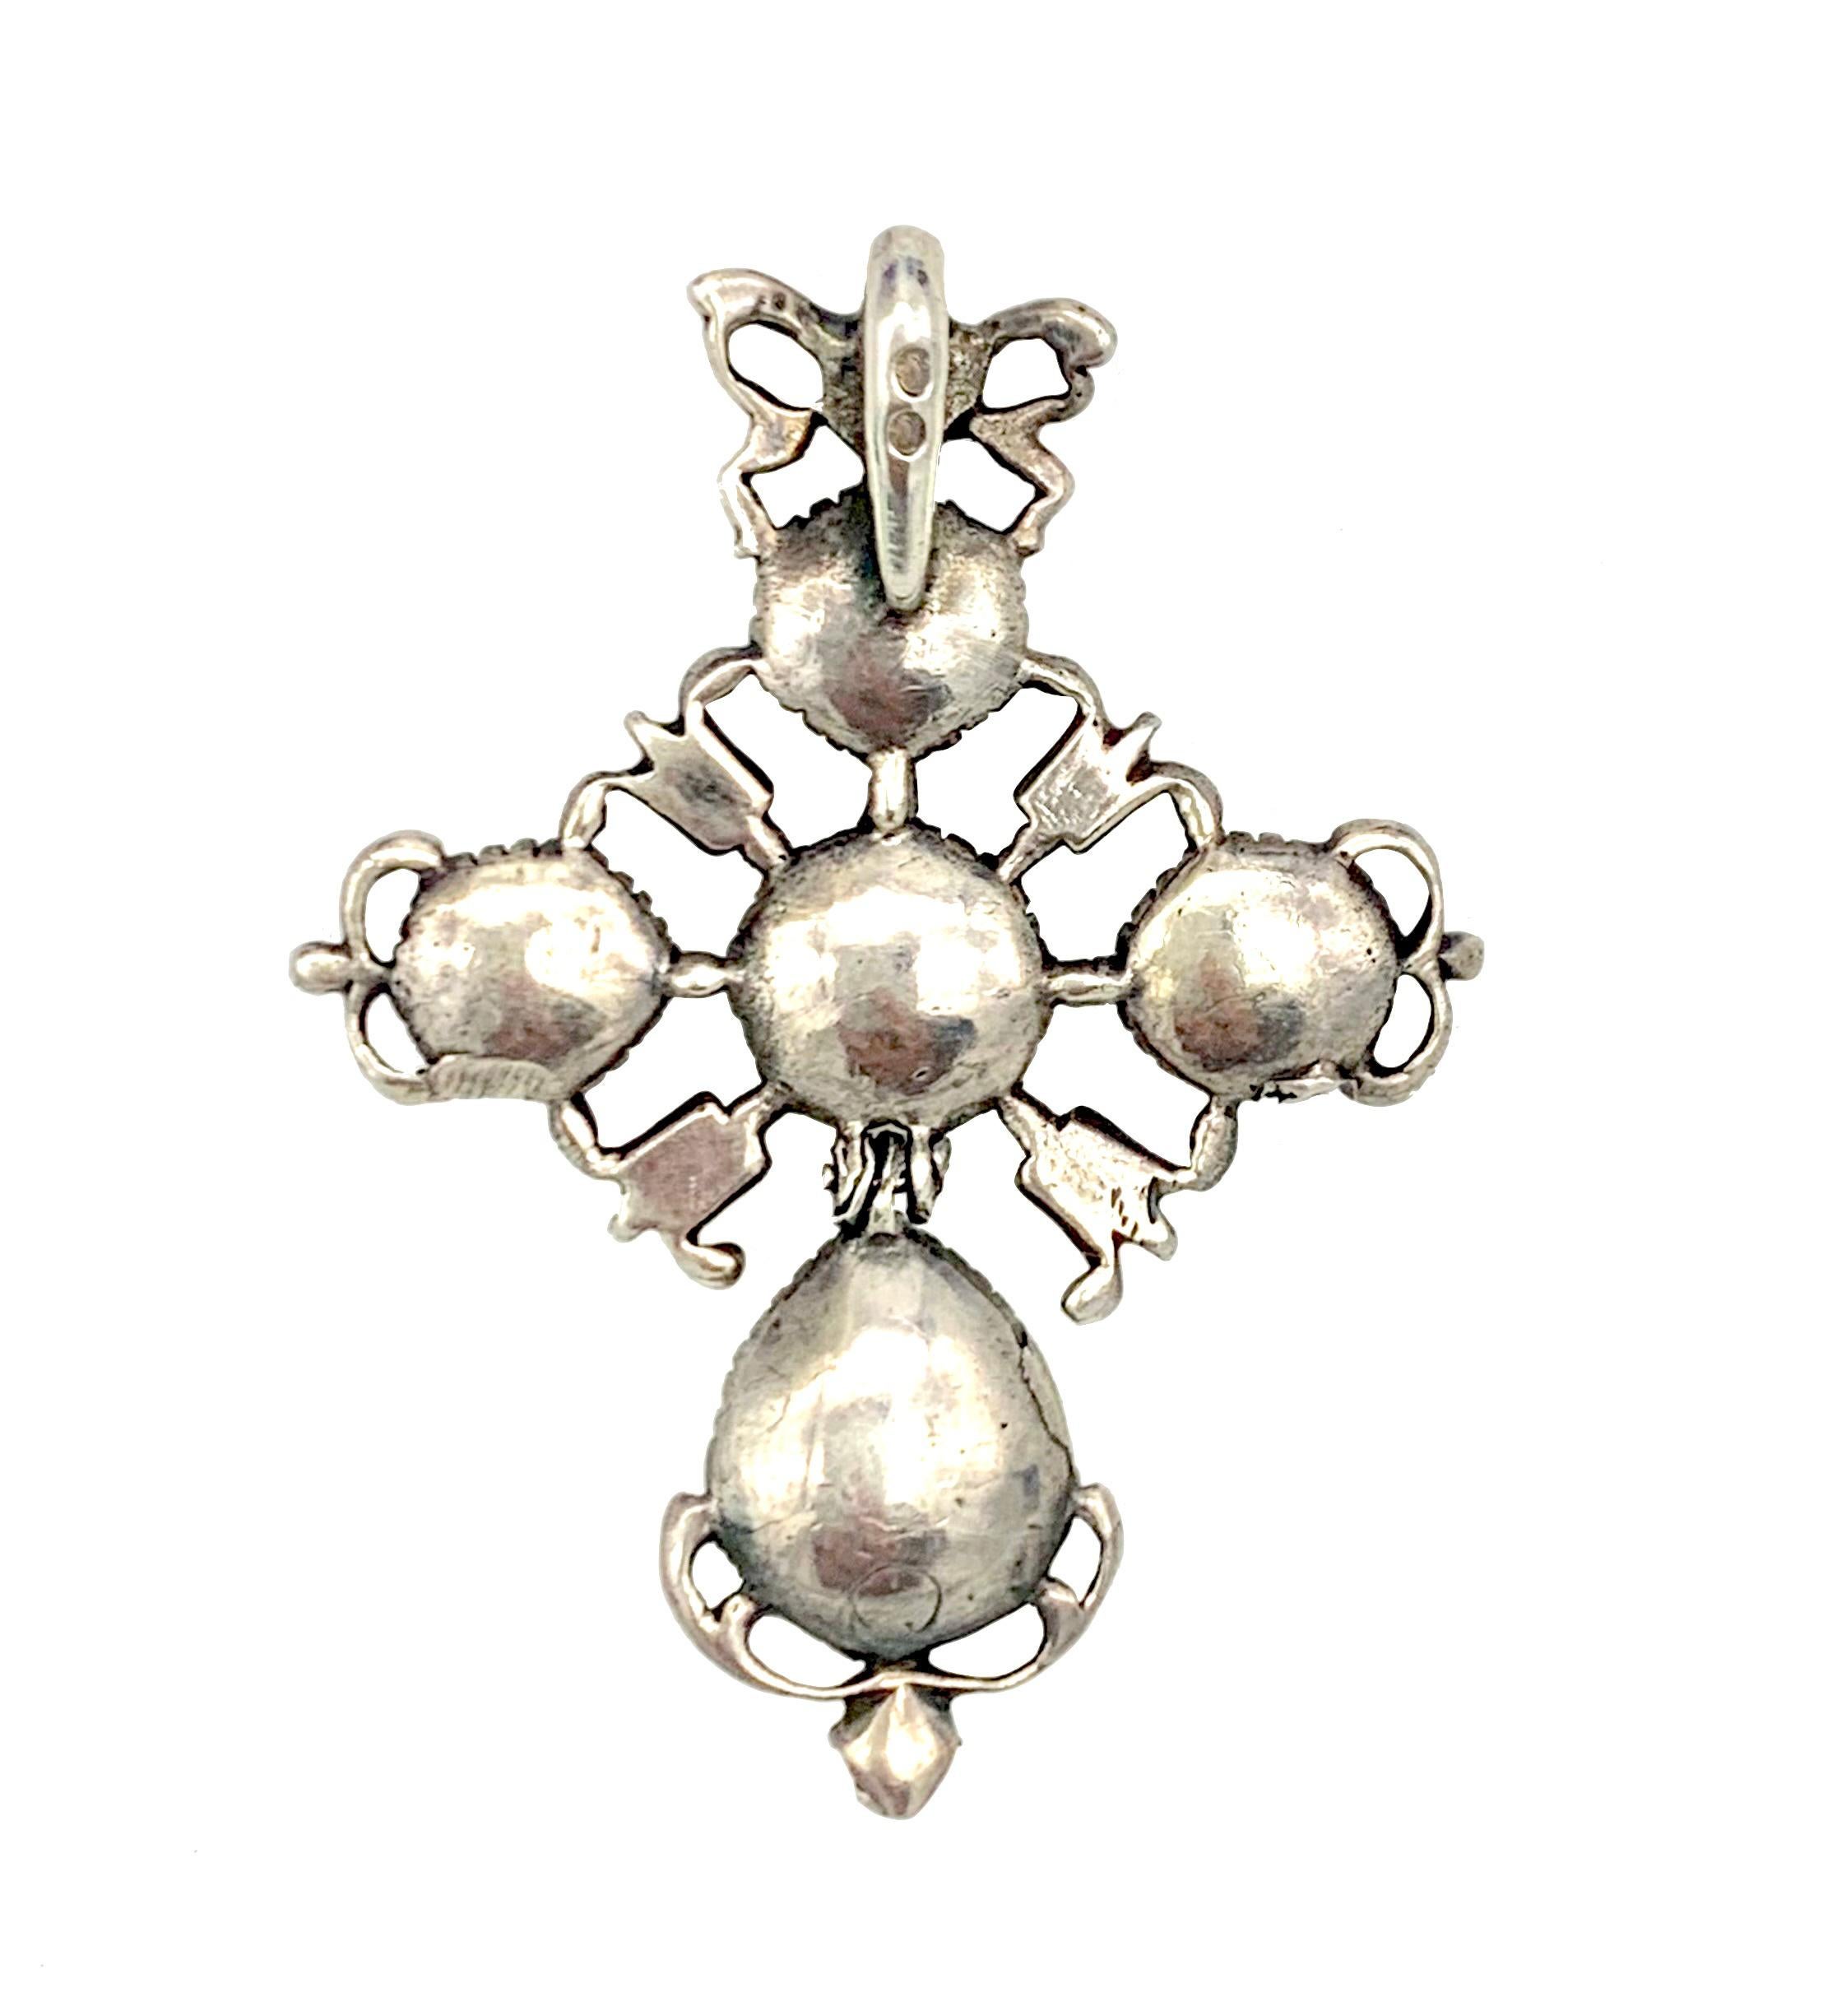 This beautiful and original silver cross was handcrafted in the second half of the 18th century, in the 1770's. The jewel is set with old mine rose diamonds in closed settings. From a bow shaped slide a cross is suspended. The large drop shaped